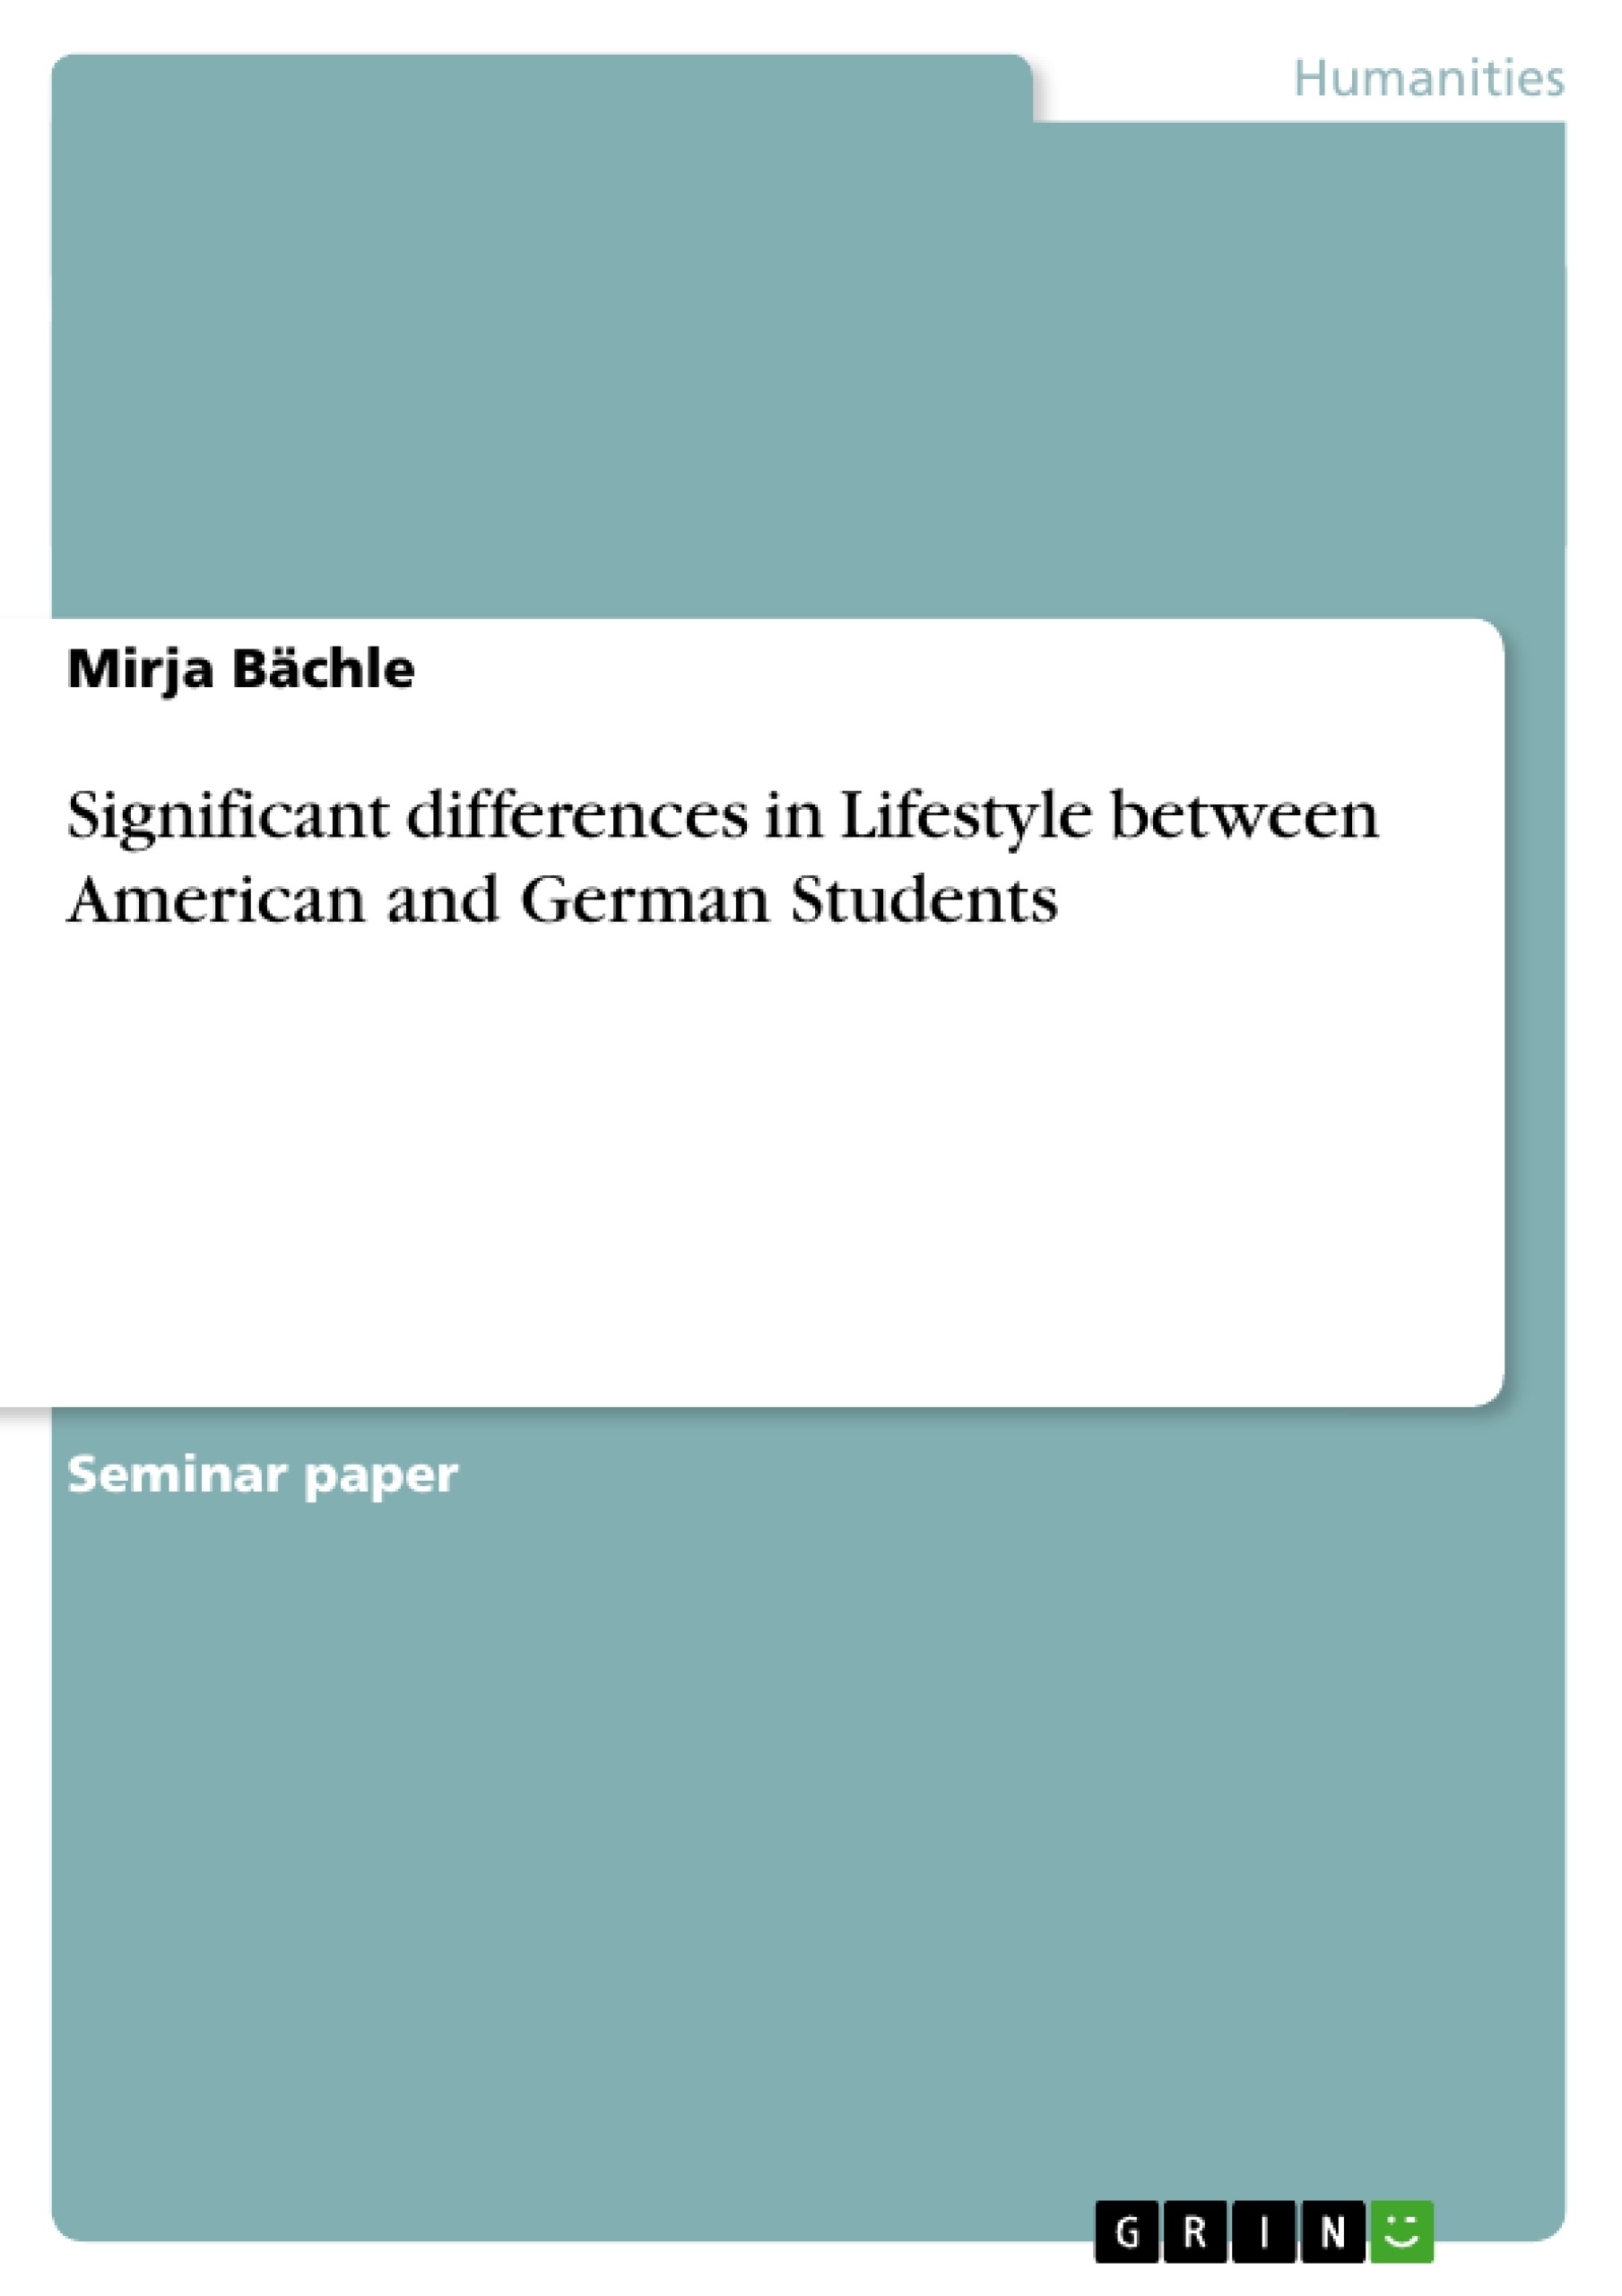 Title: Significant differences in Lifestyle between American and German Students